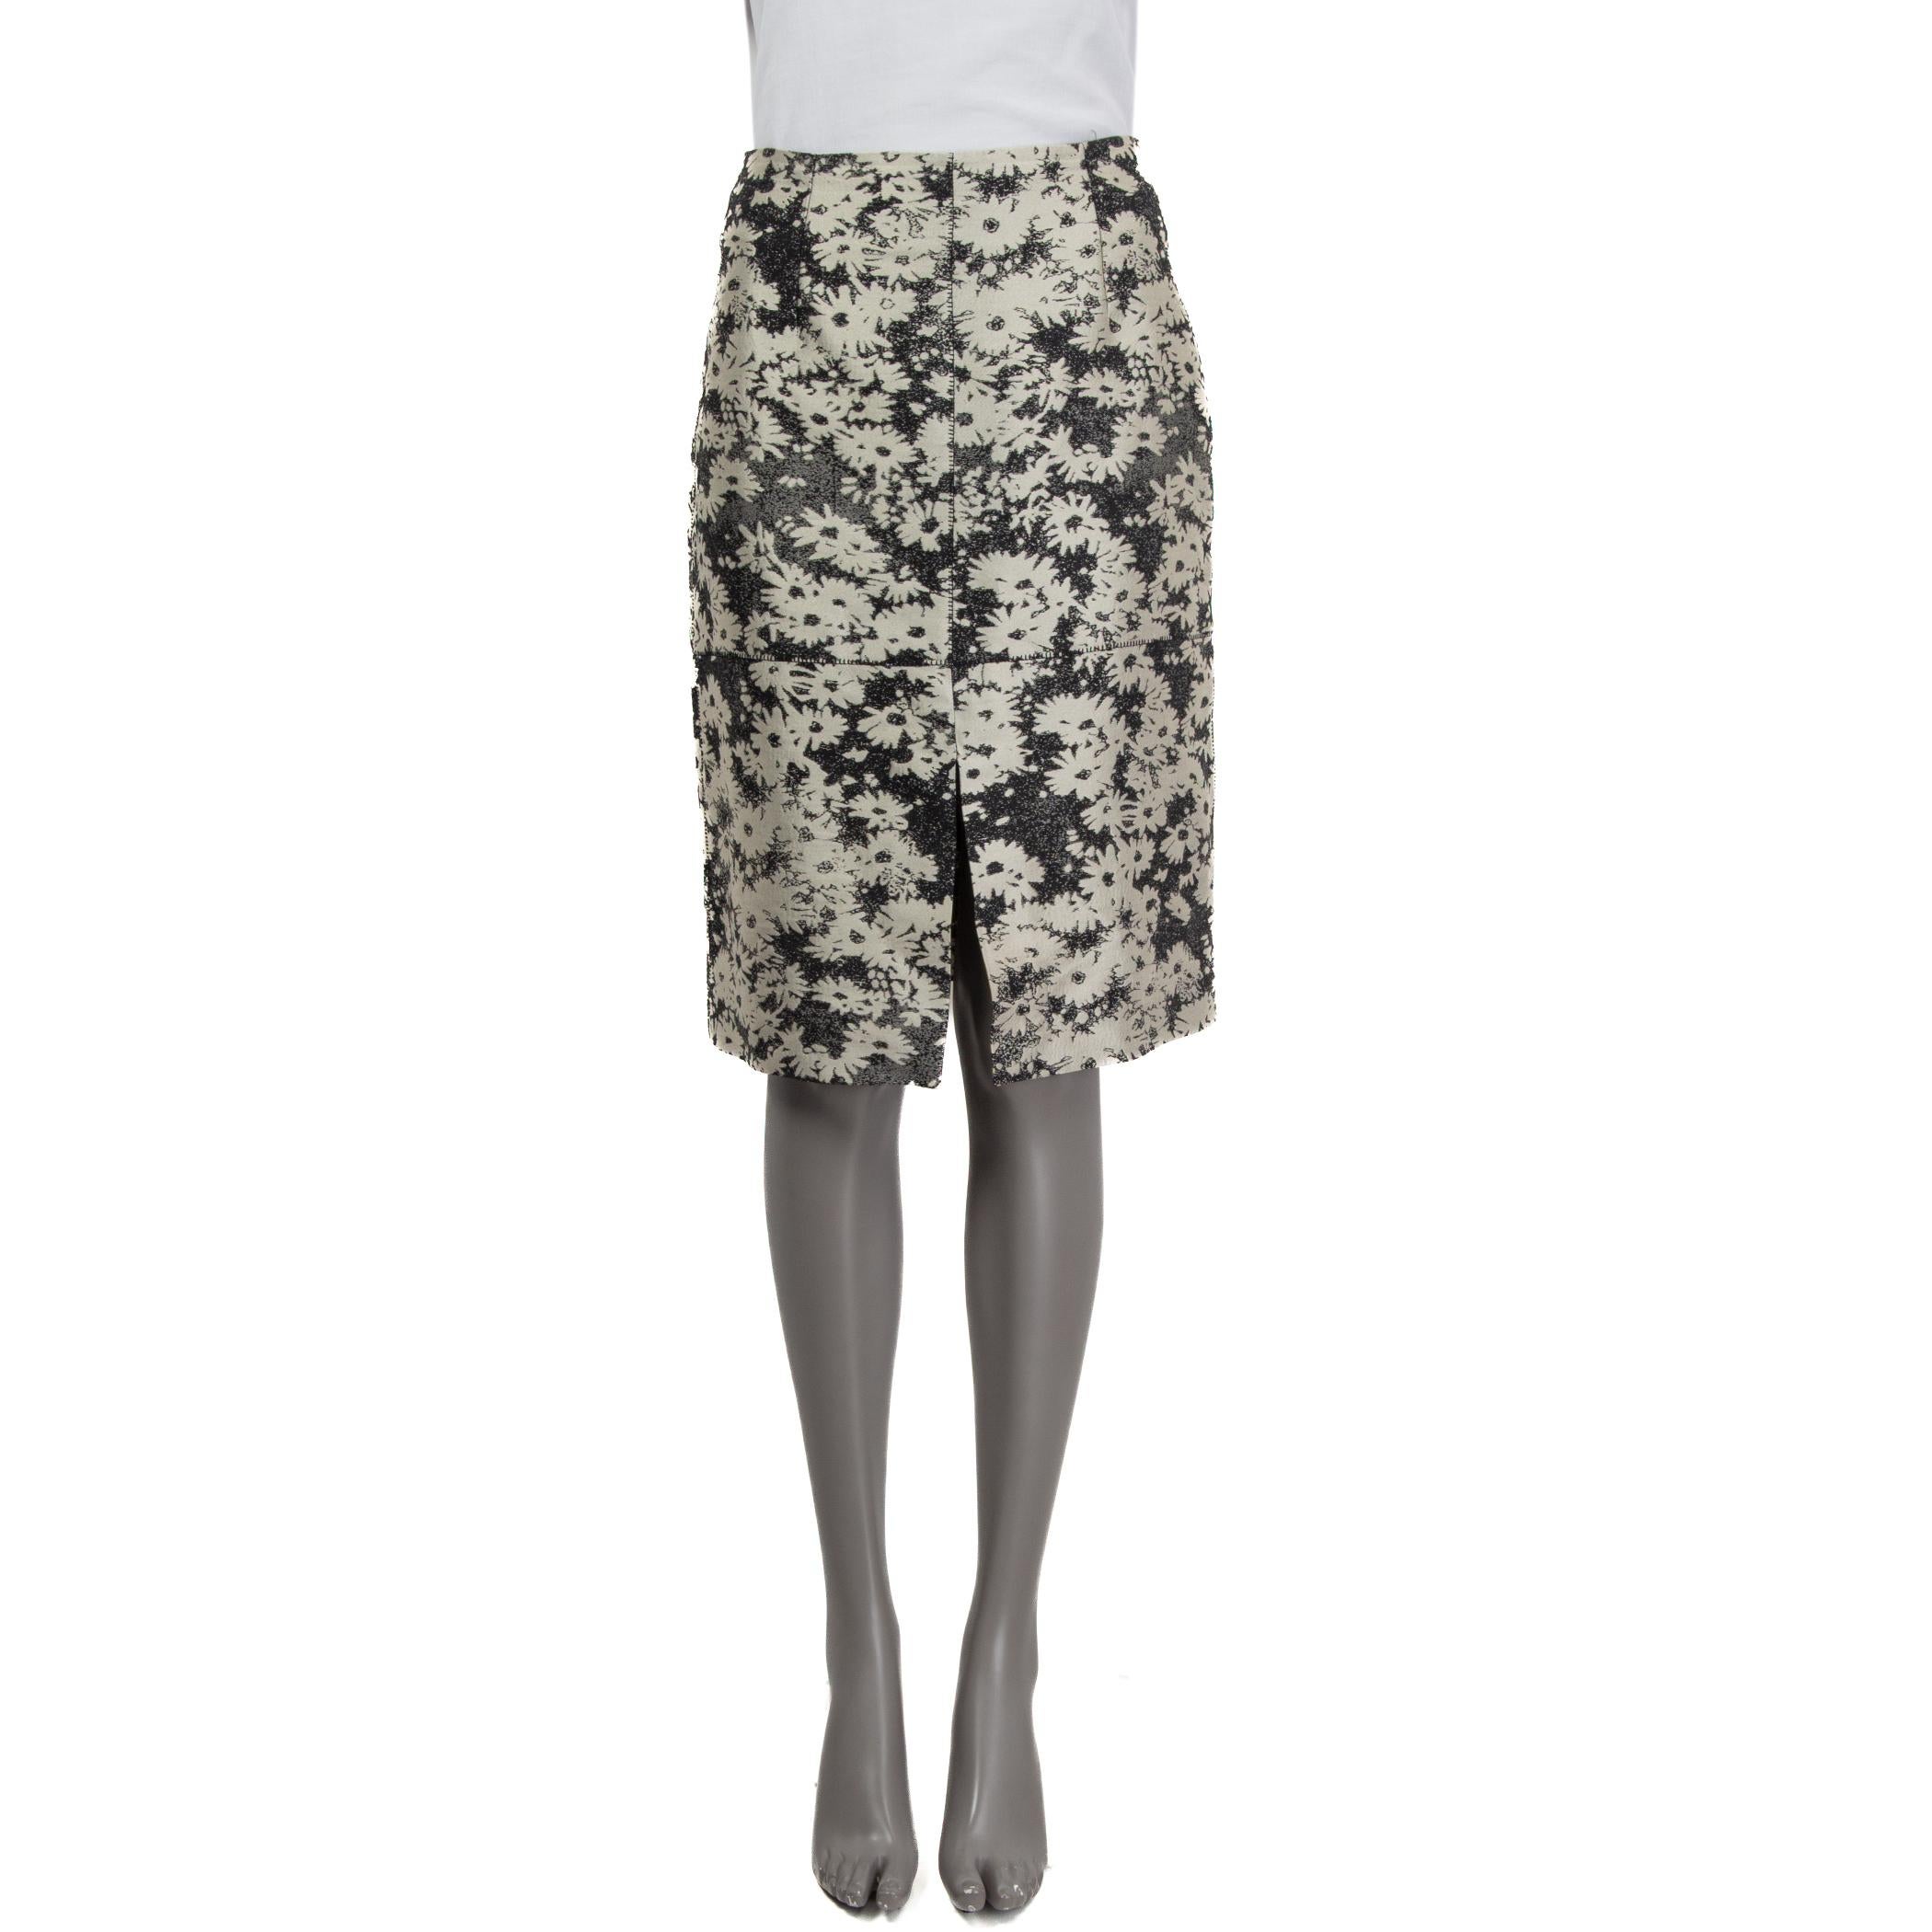 100% authentic Stella McCartney jacquard floral knee-length skirt in black, gray and silver cotton (60%), polyester (32%) and silk (8%). Features a slit on the front. Opens with a zipper and a hook at the back. Unlined. Has some faint stains of